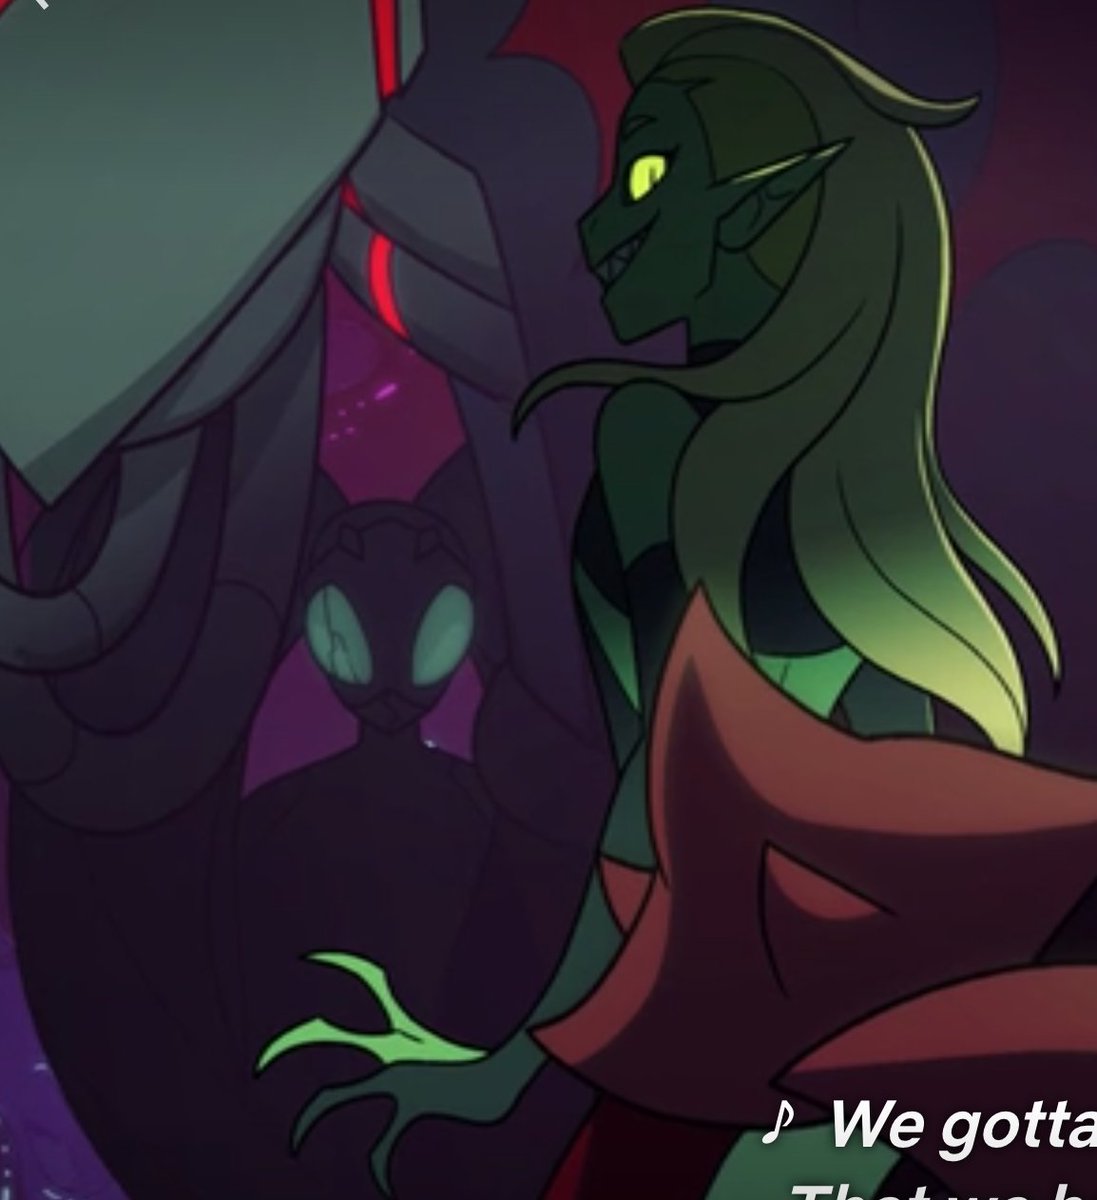 OH I FOUND ENTRAPTA IN THE INTRO THAT'S GOTTA BE HER????